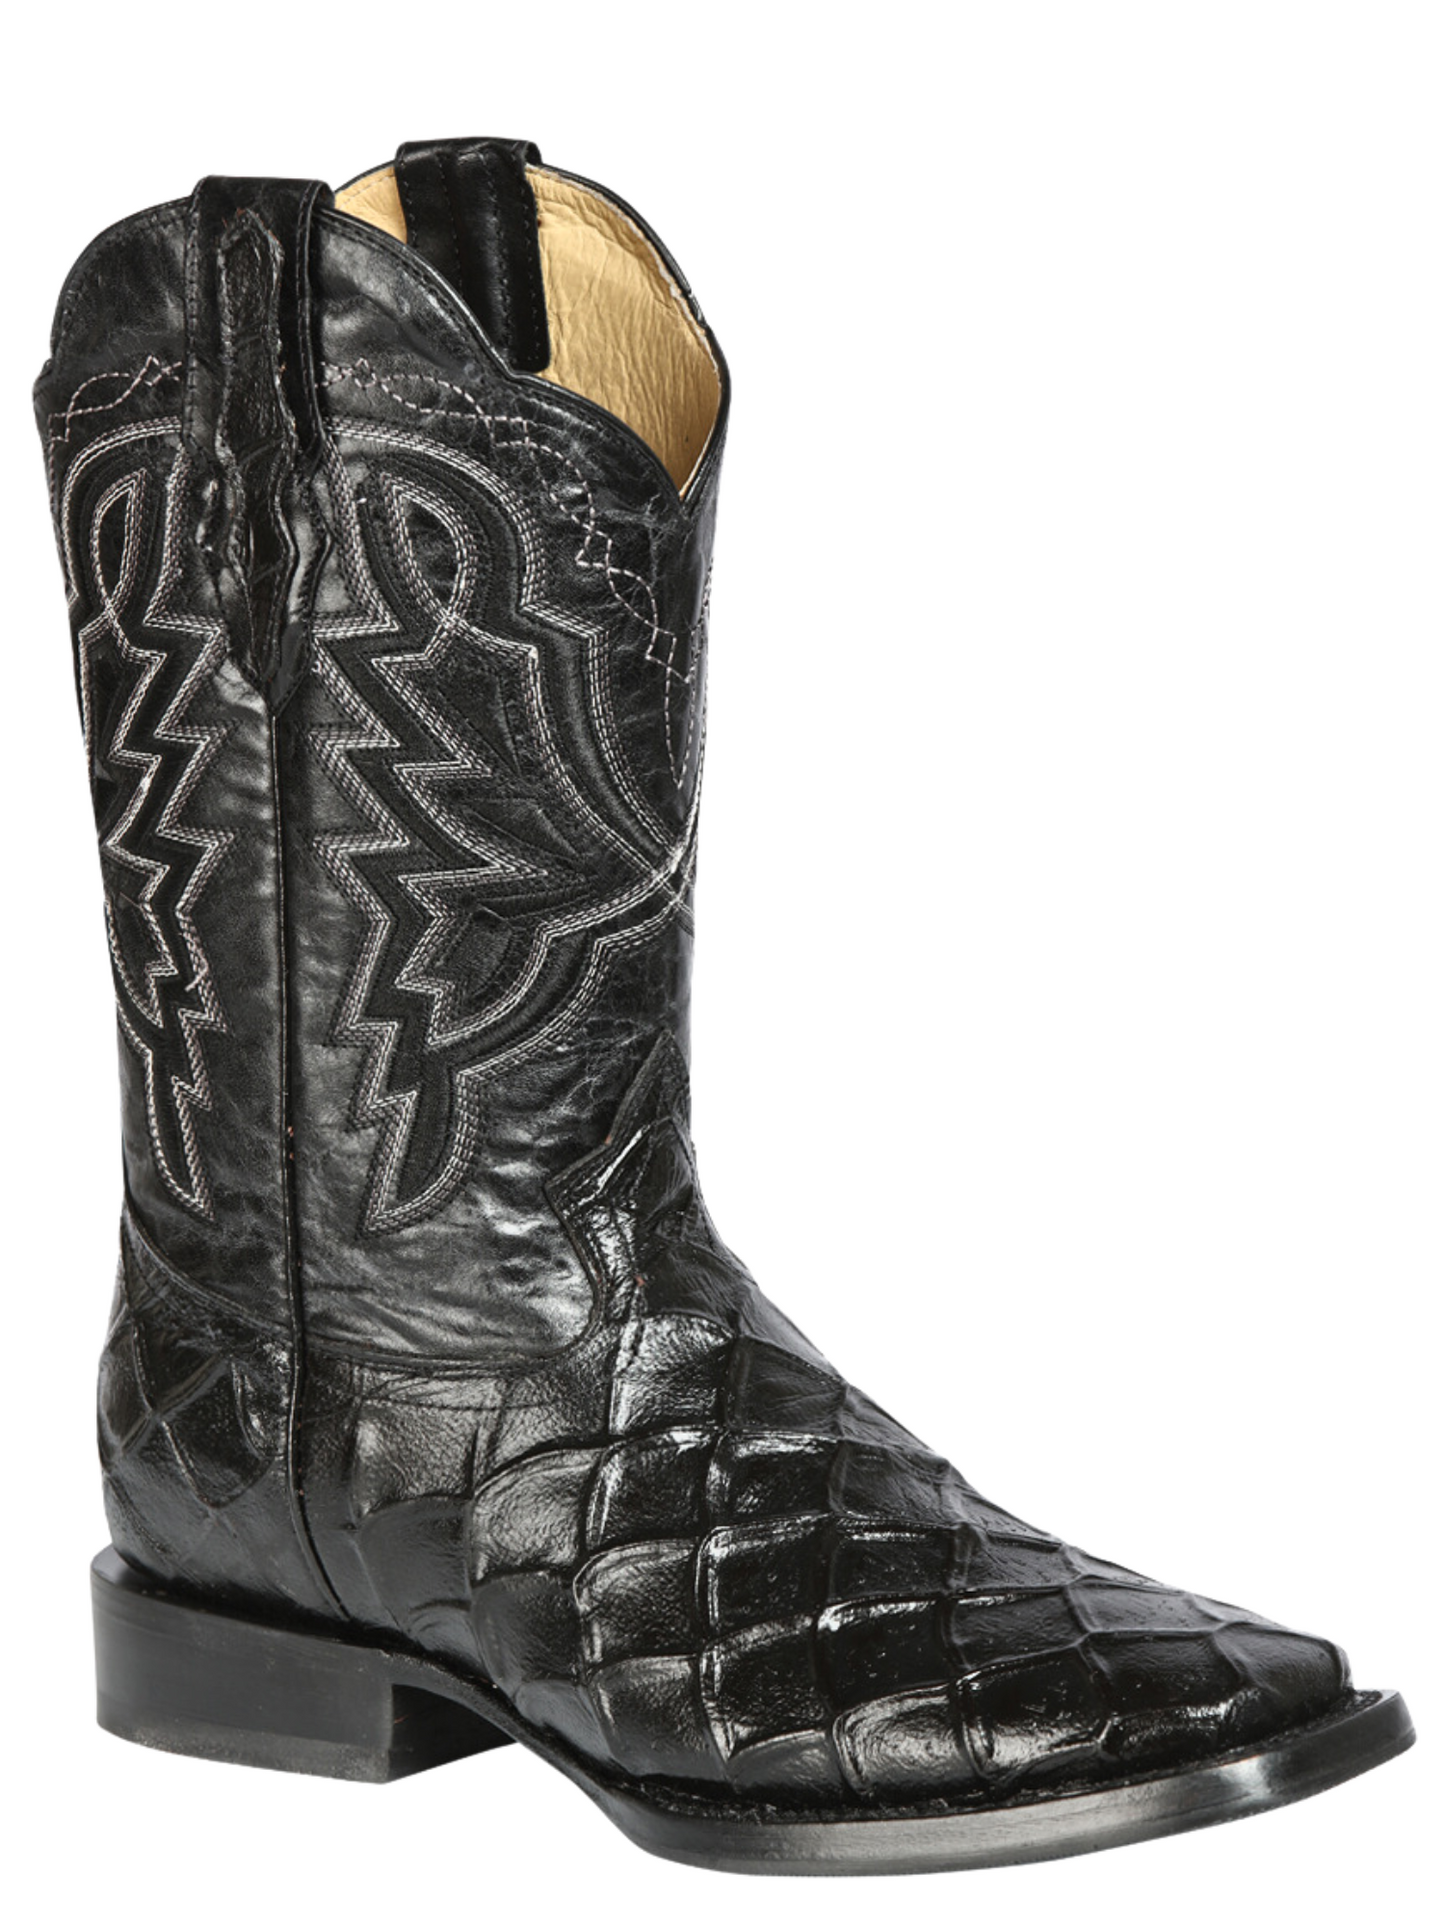 Rodeo Cowboy Boots Imitation of Monster Fish Engraved in Cowhide Leather for Men 'El General' - ID: 44663 Cowboy Boots El General